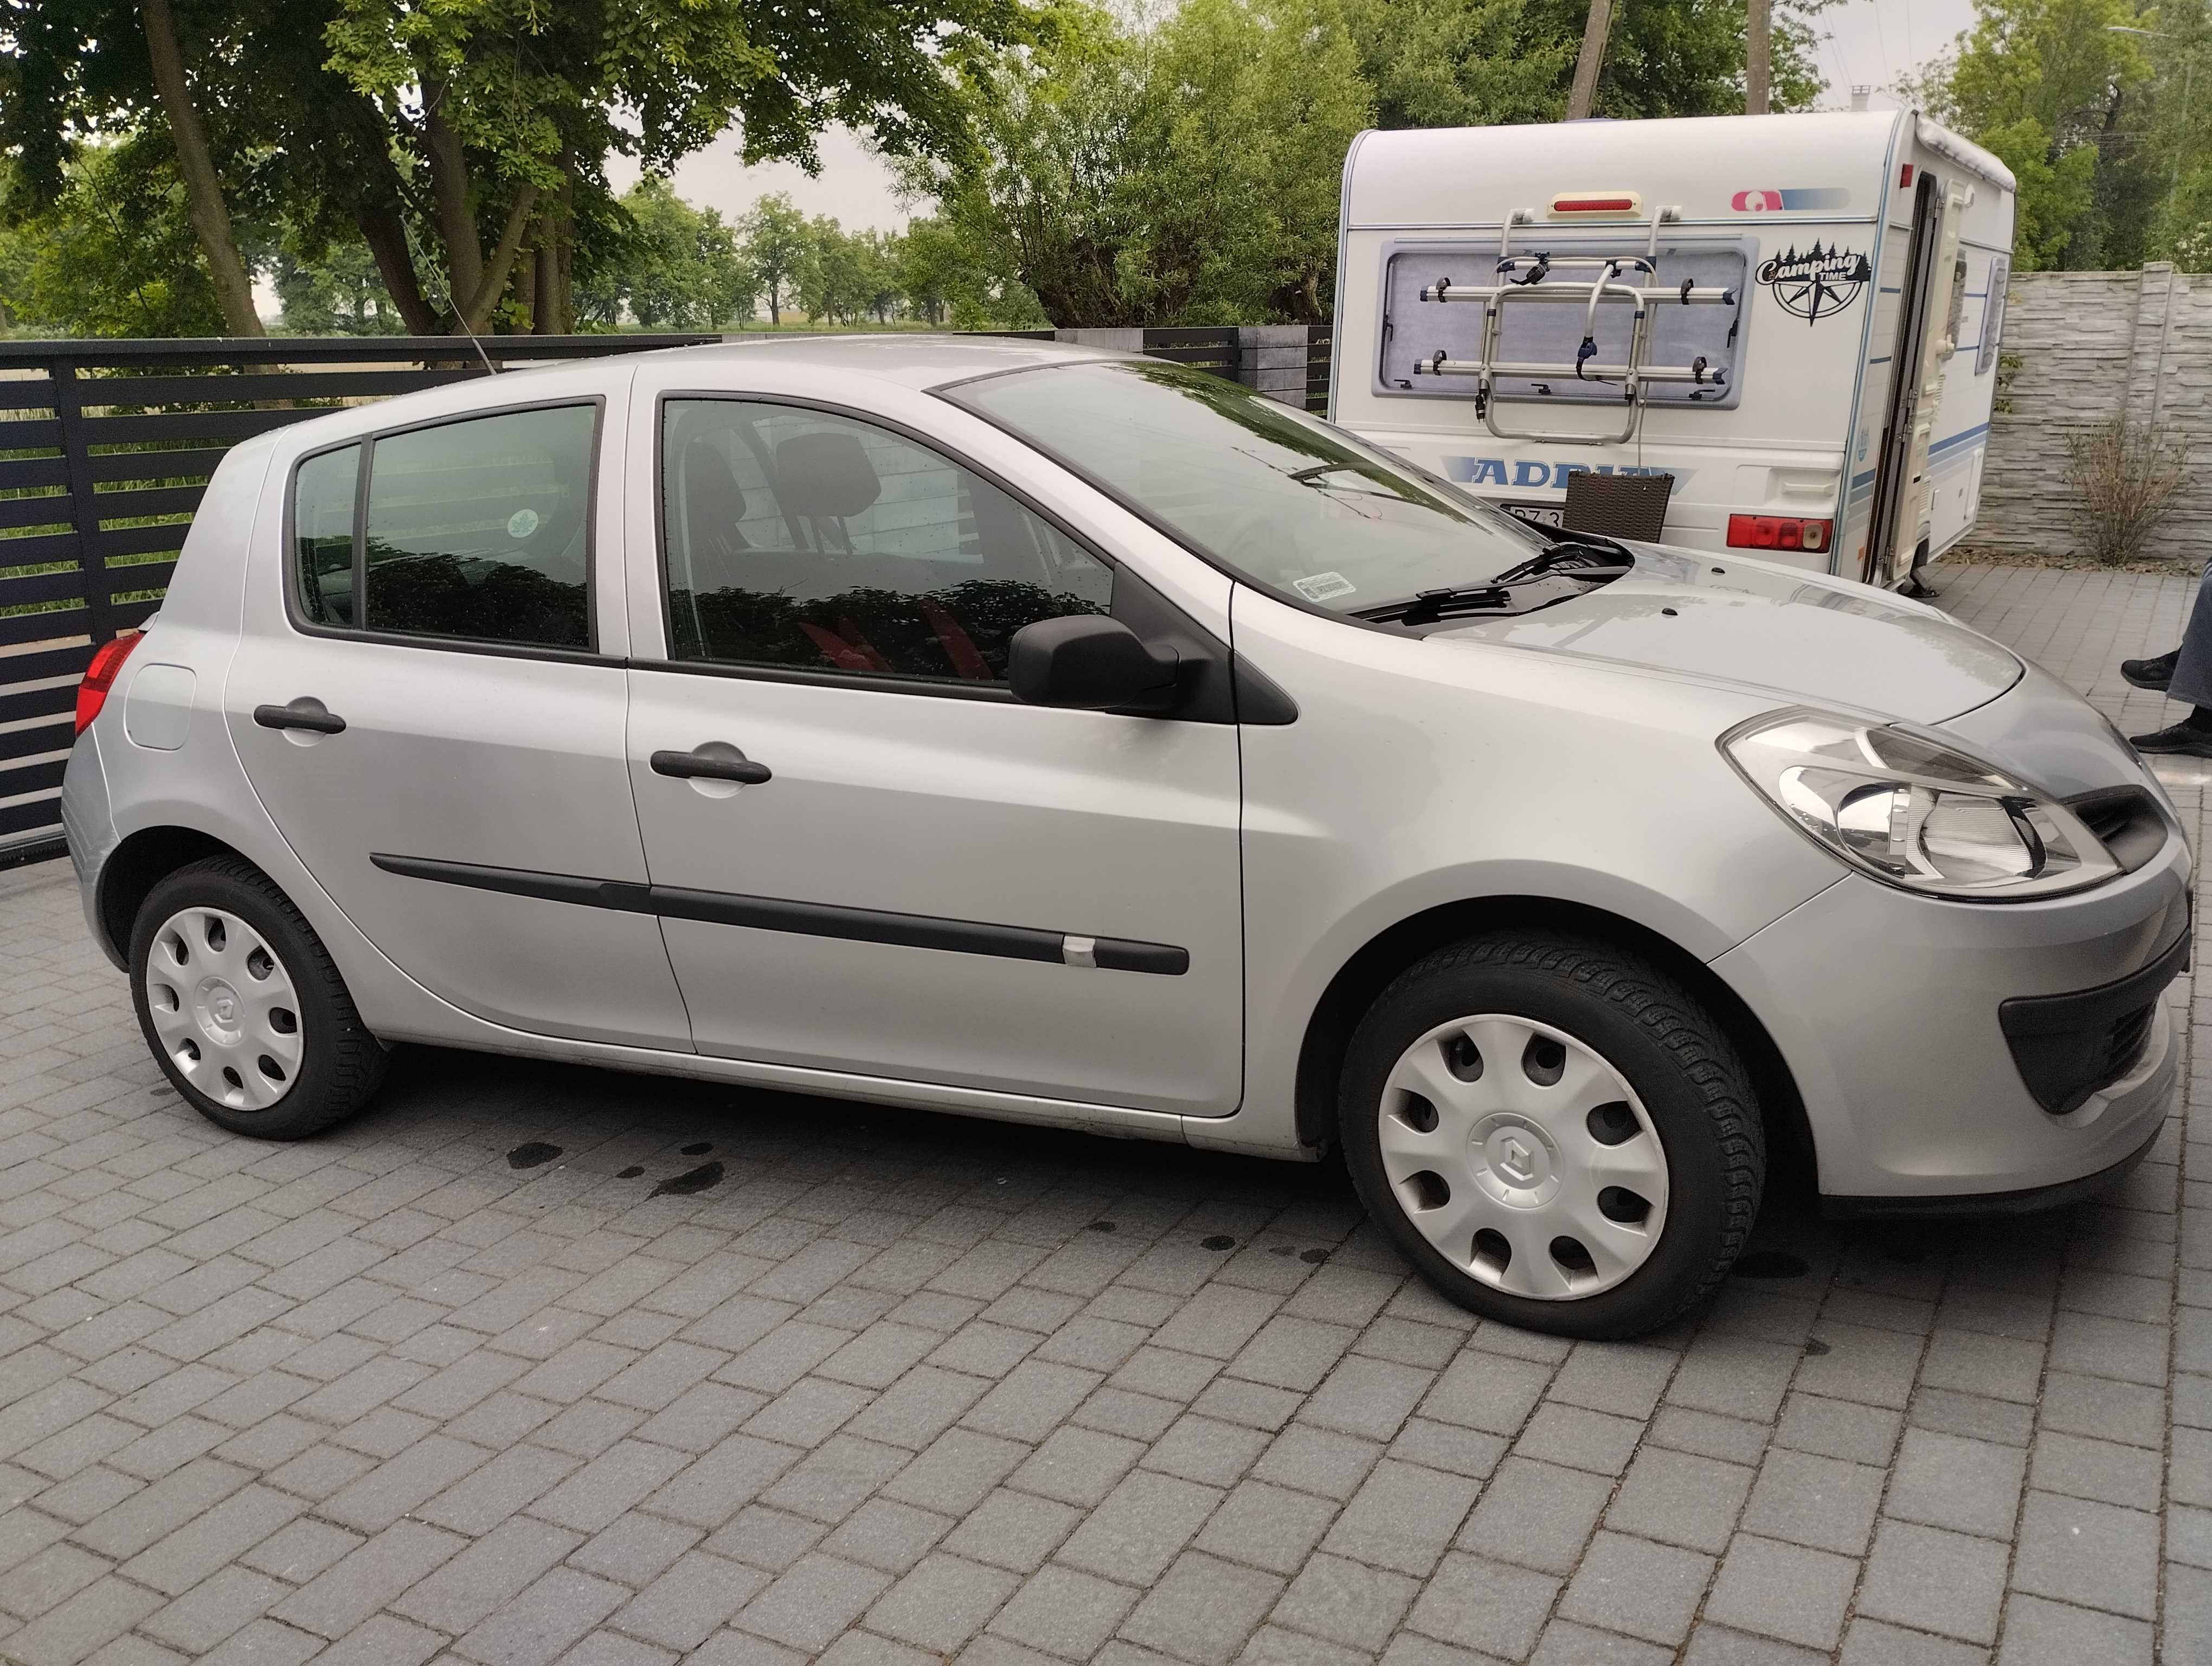 Renault Clio 3 1.2 benzyna